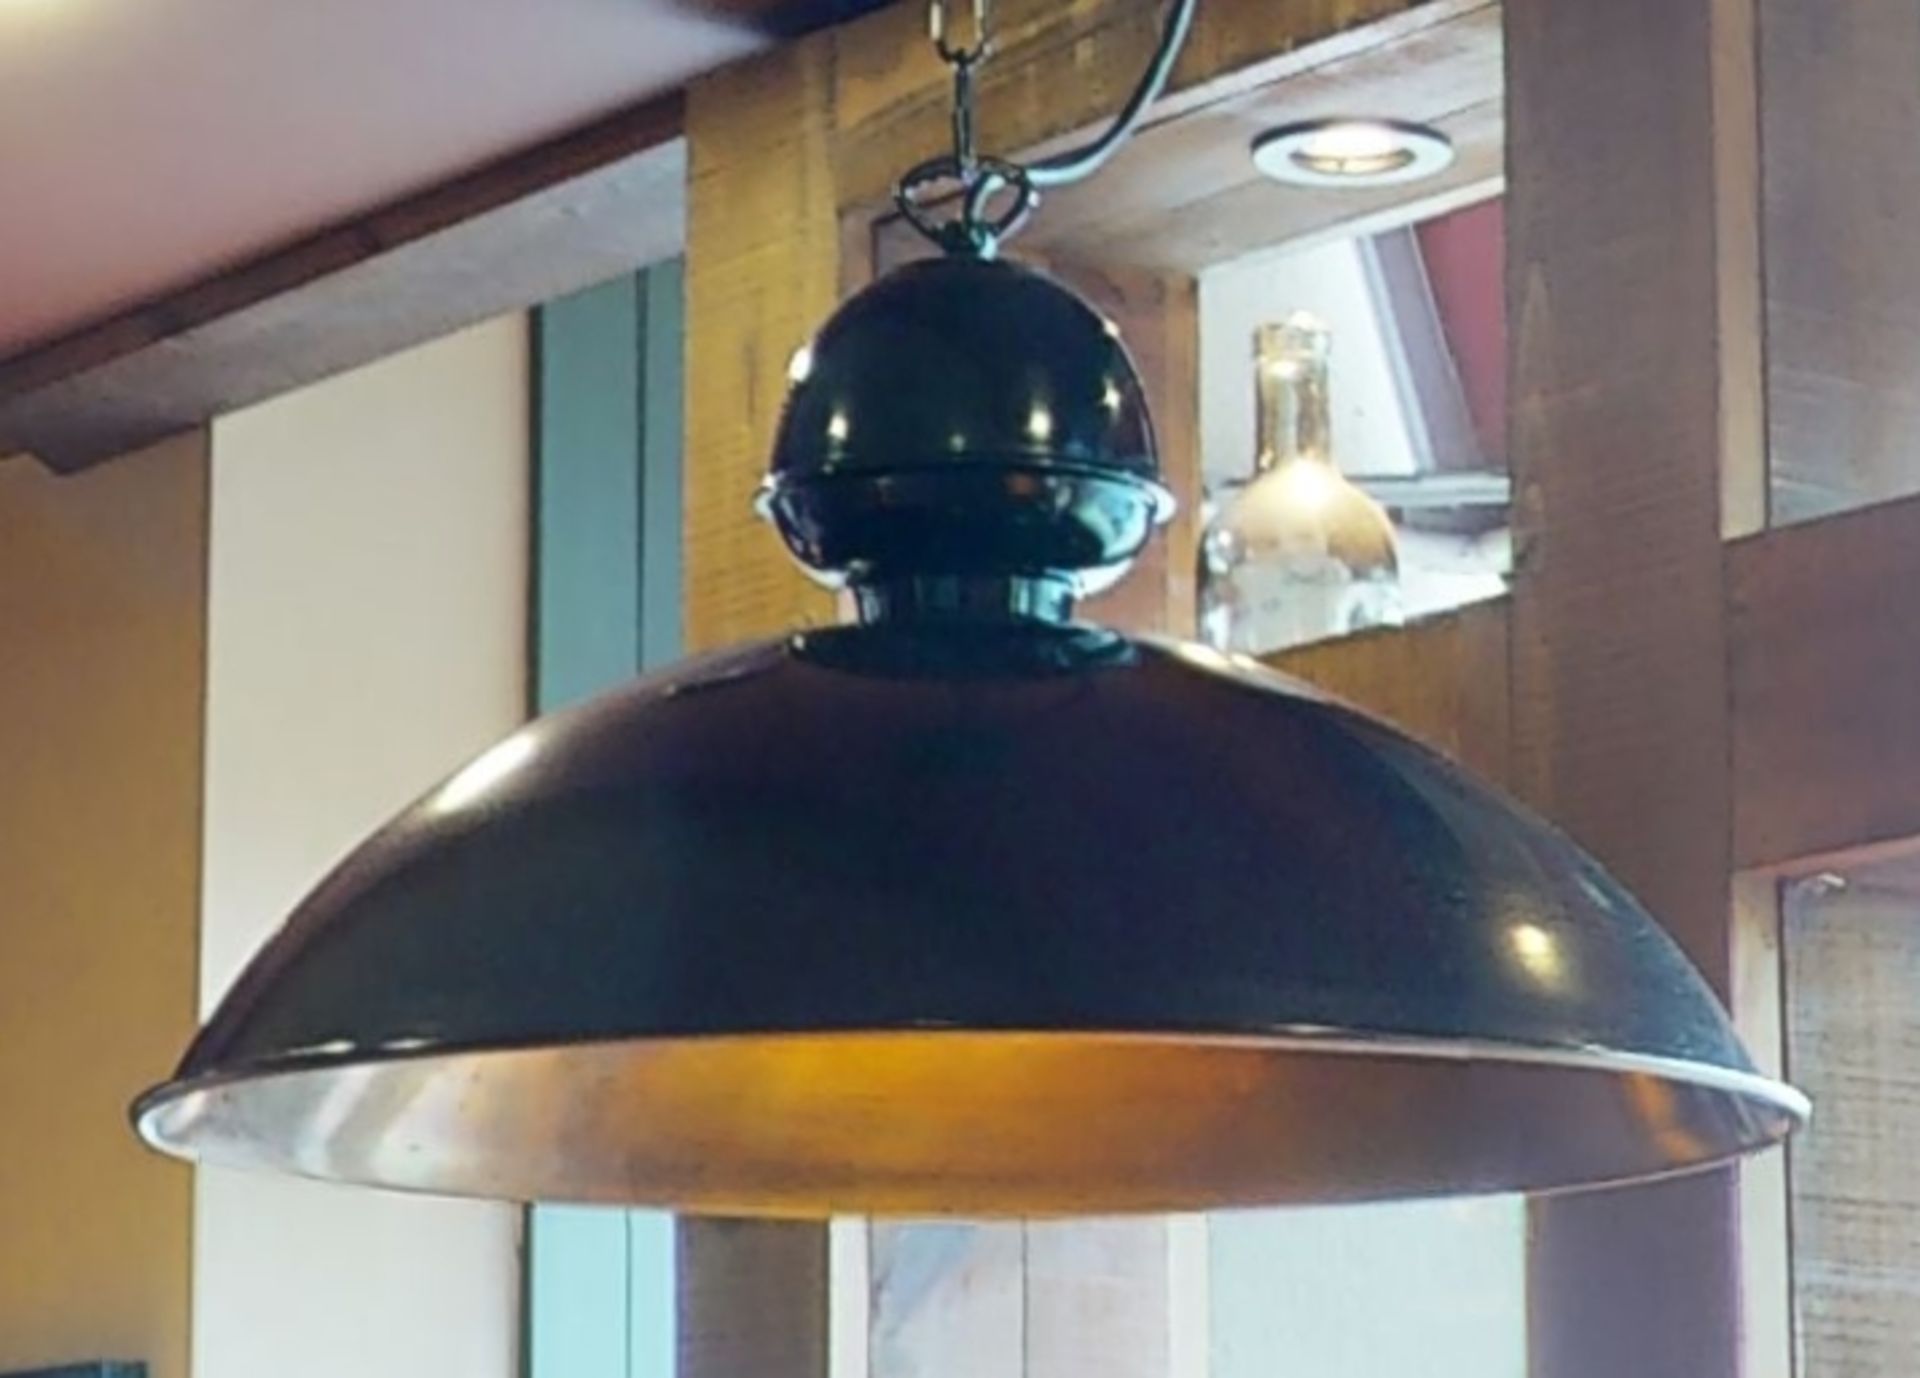 6 x Industrial Style Black Ceiling Pendant Dome Lights - Black Finish With Coloured Inner - Short - Image 6 of 9